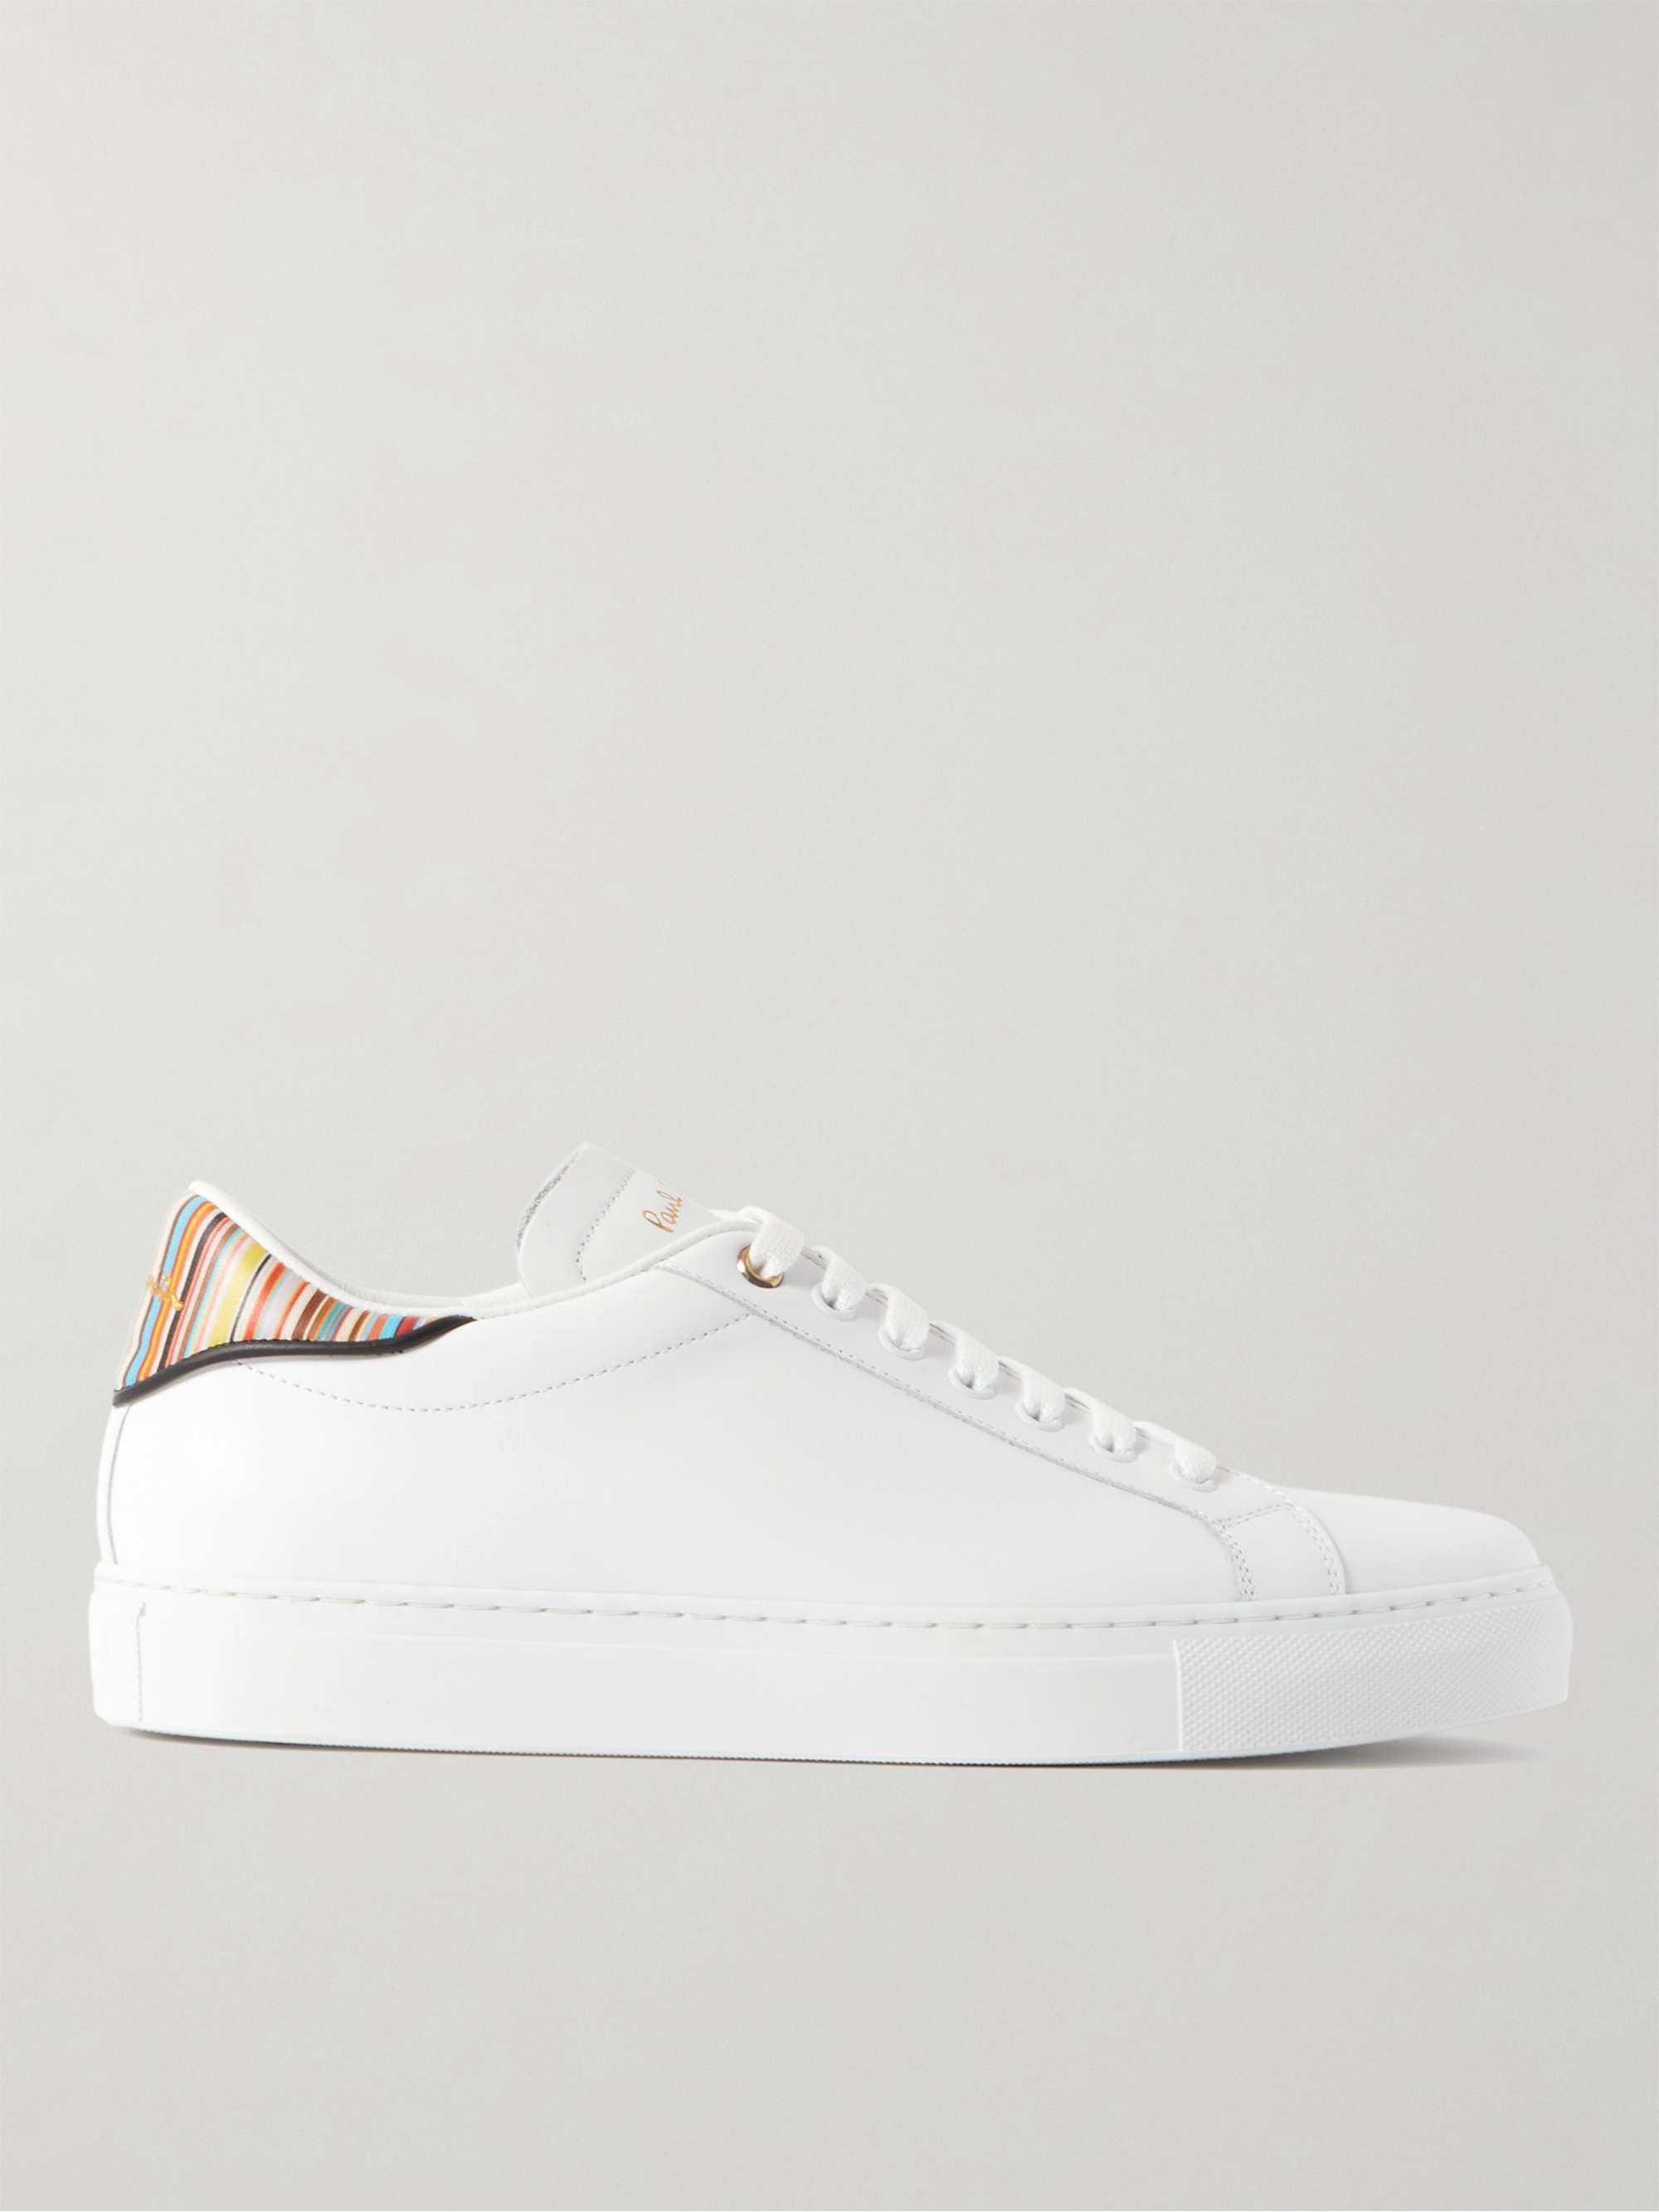 PAUL SMITH Beck Artist Stripe Leather Sneakers